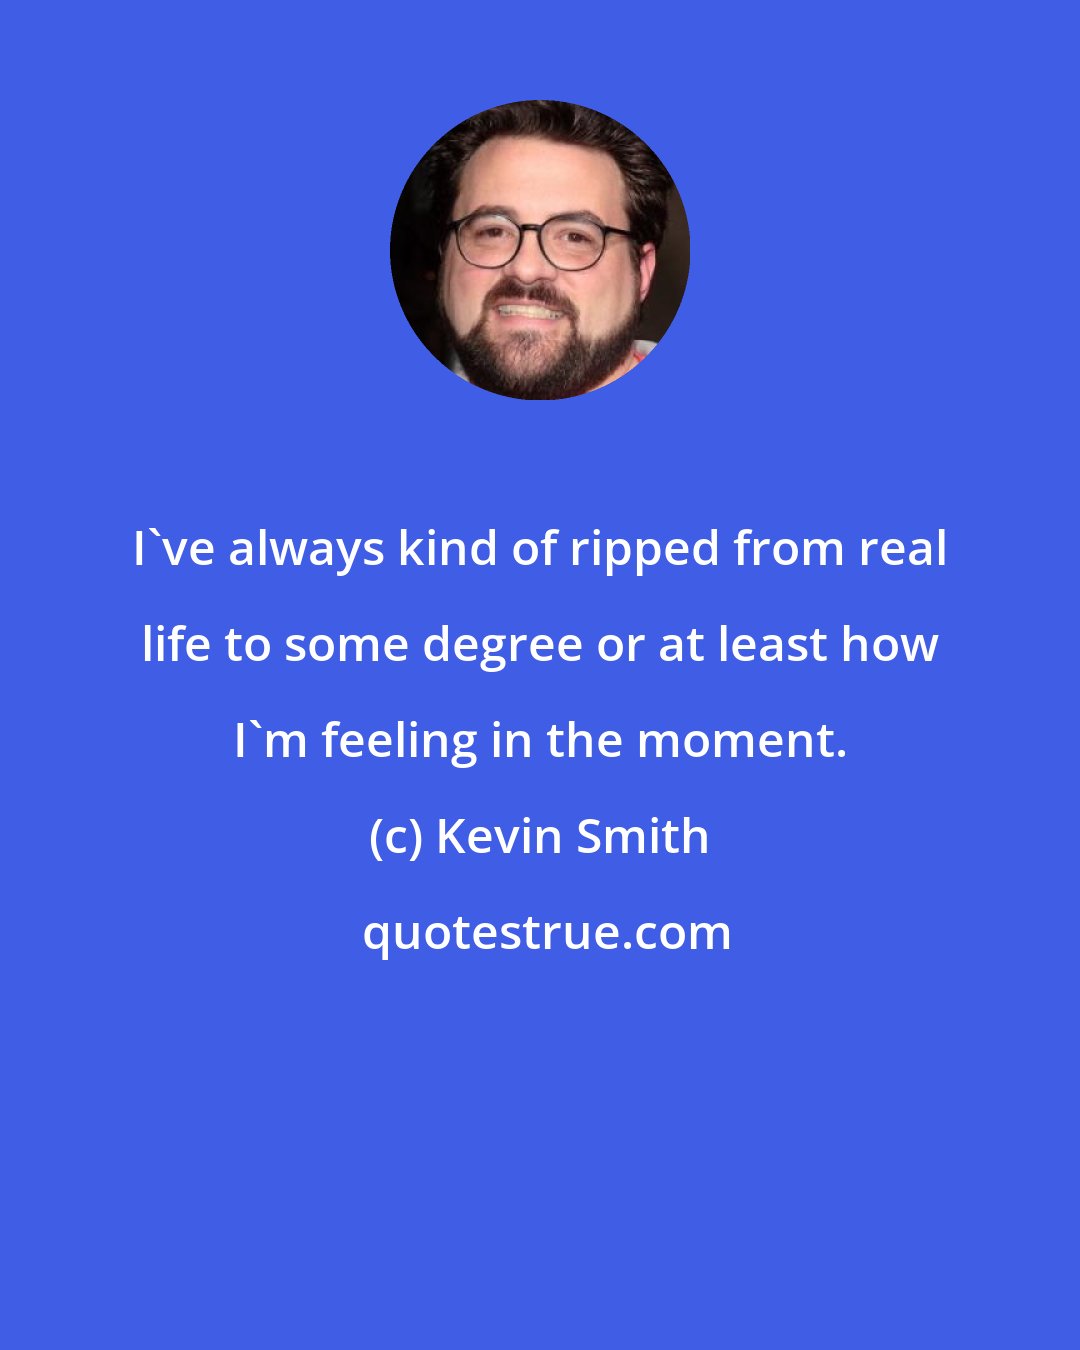 Kevin Smith: I've always kind of ripped from real life to some degree or at least how I'm feeling in the moment.